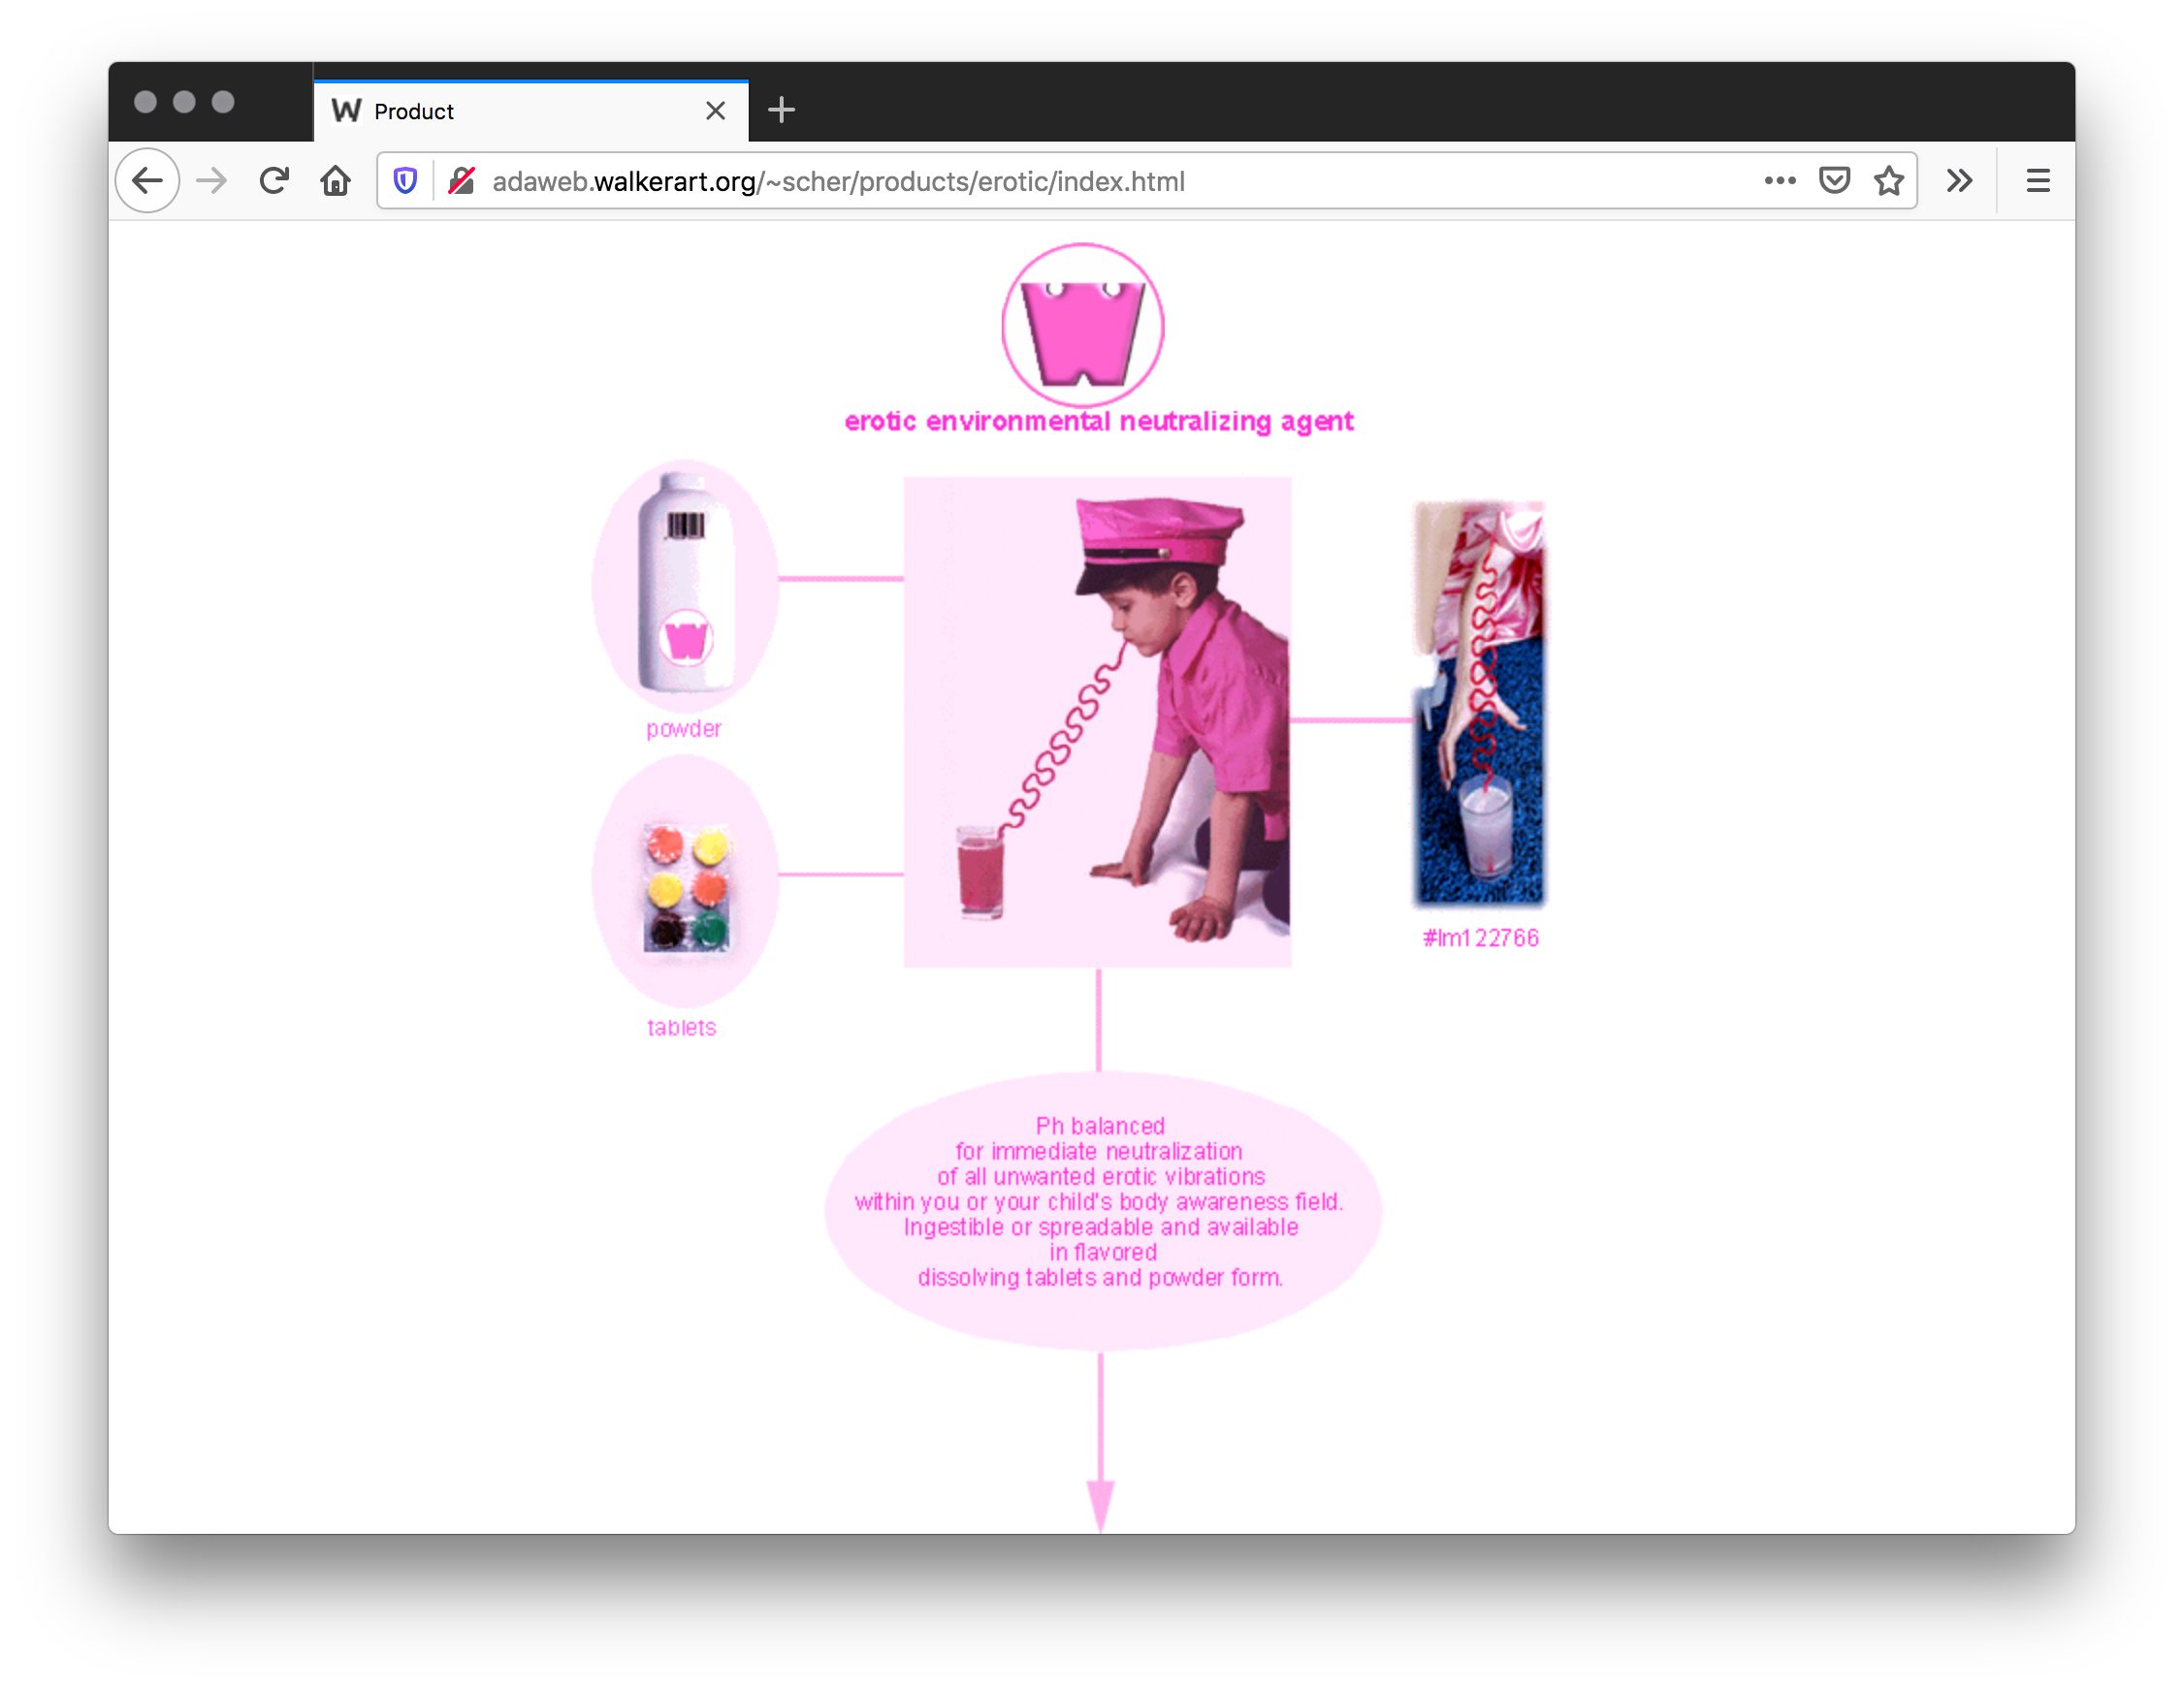 Screenshot of white webpage with with a pink logo and text on top. An image of a child wearing a pink hat and shirt drinking out of a pink bendy straw has pink lines mapping to images of powder, tablets, a hand grabbing a cup, and a pink oval with text.